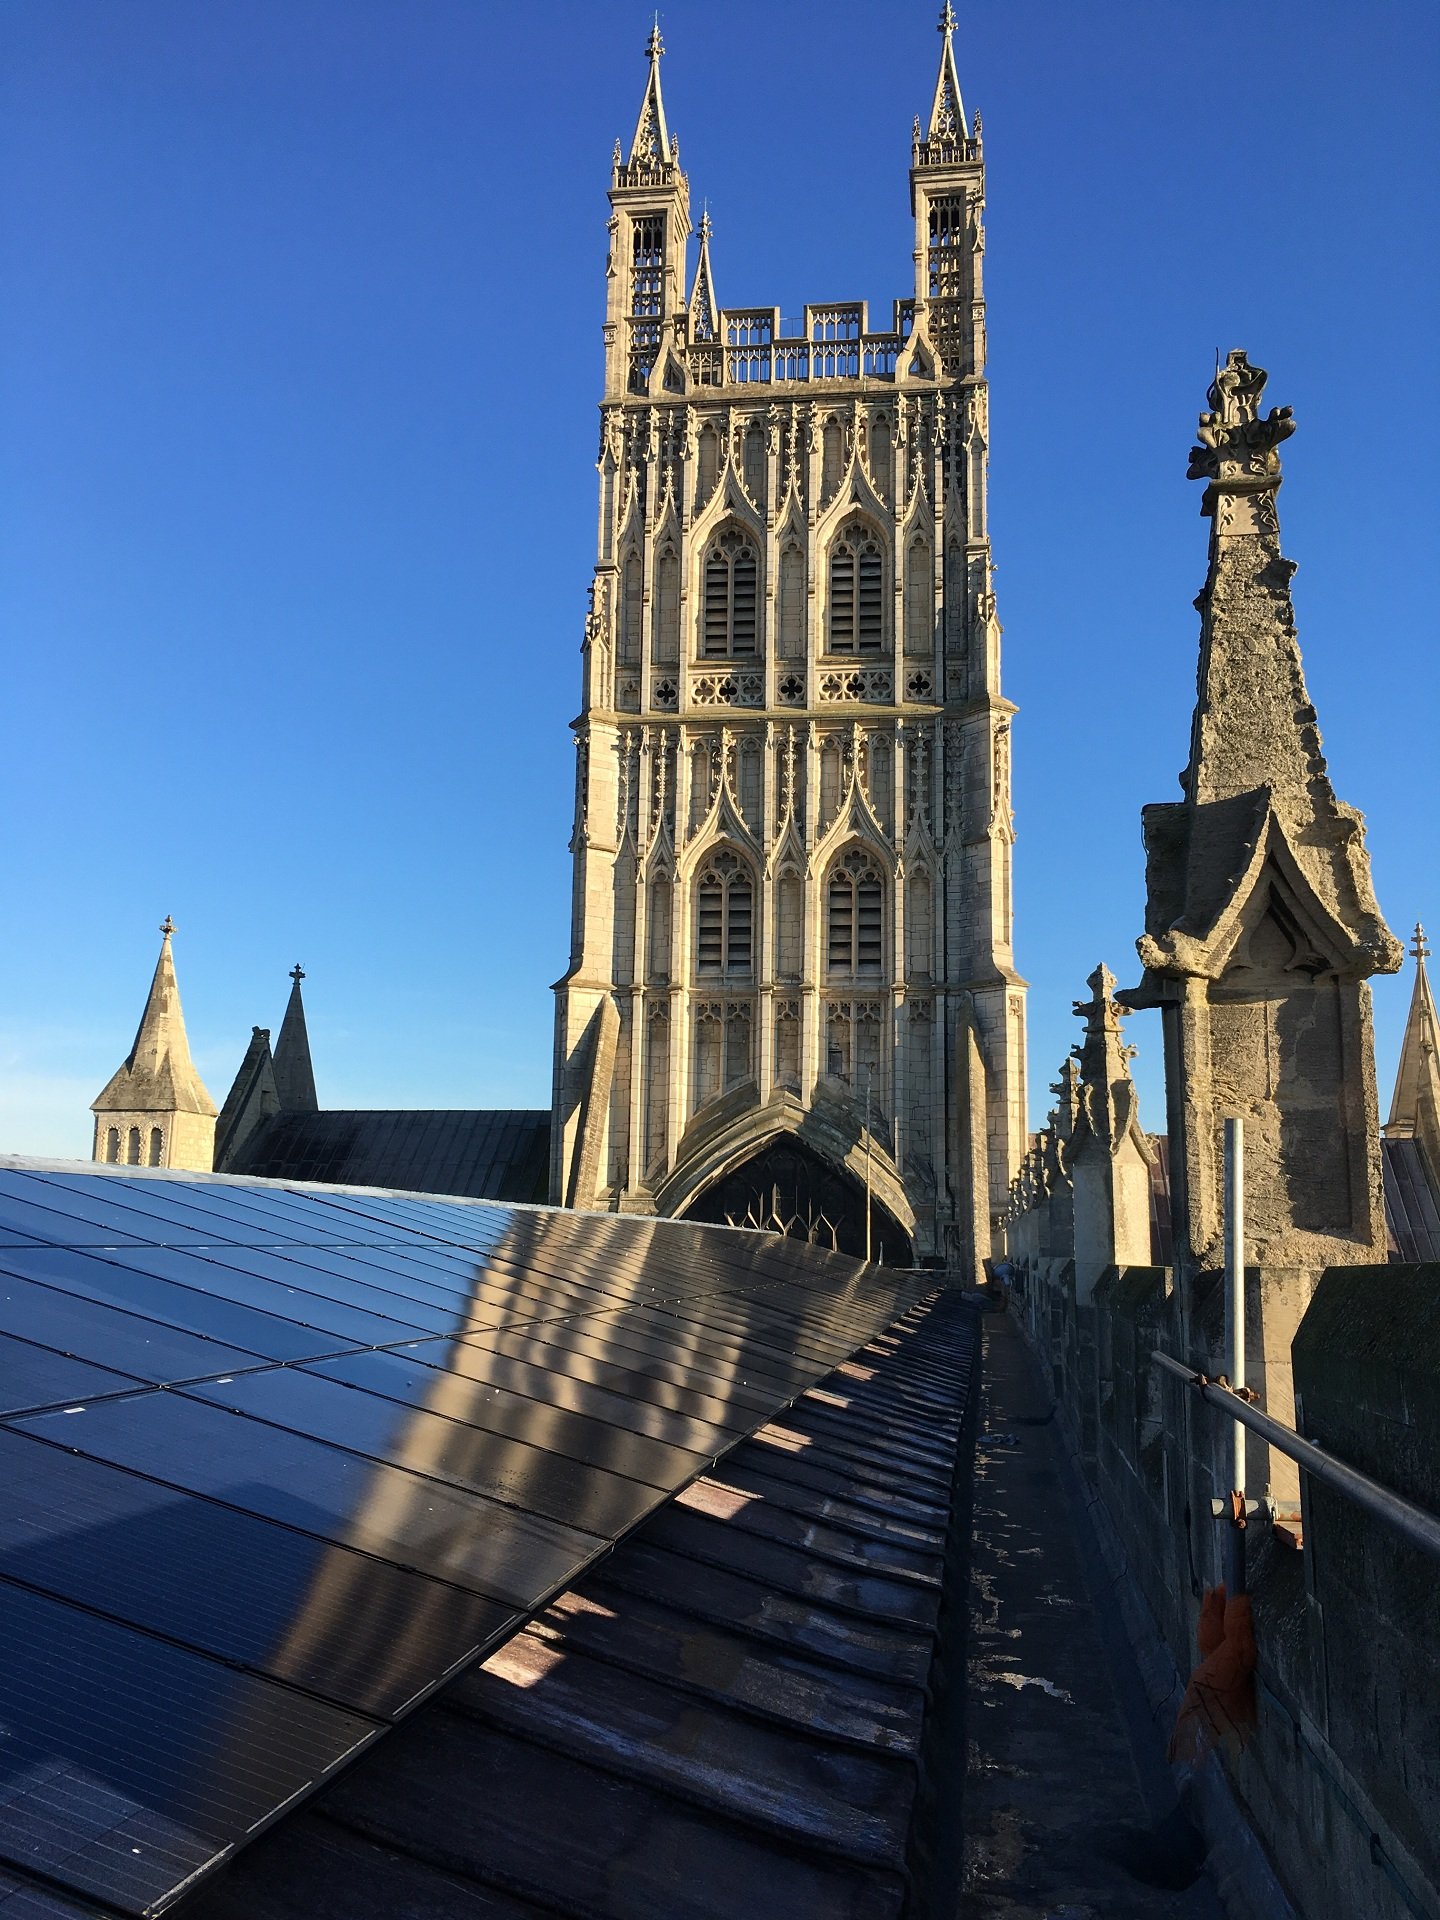 A view along the roof of the nave of Gloucester Cathedral showing all the solar panels.